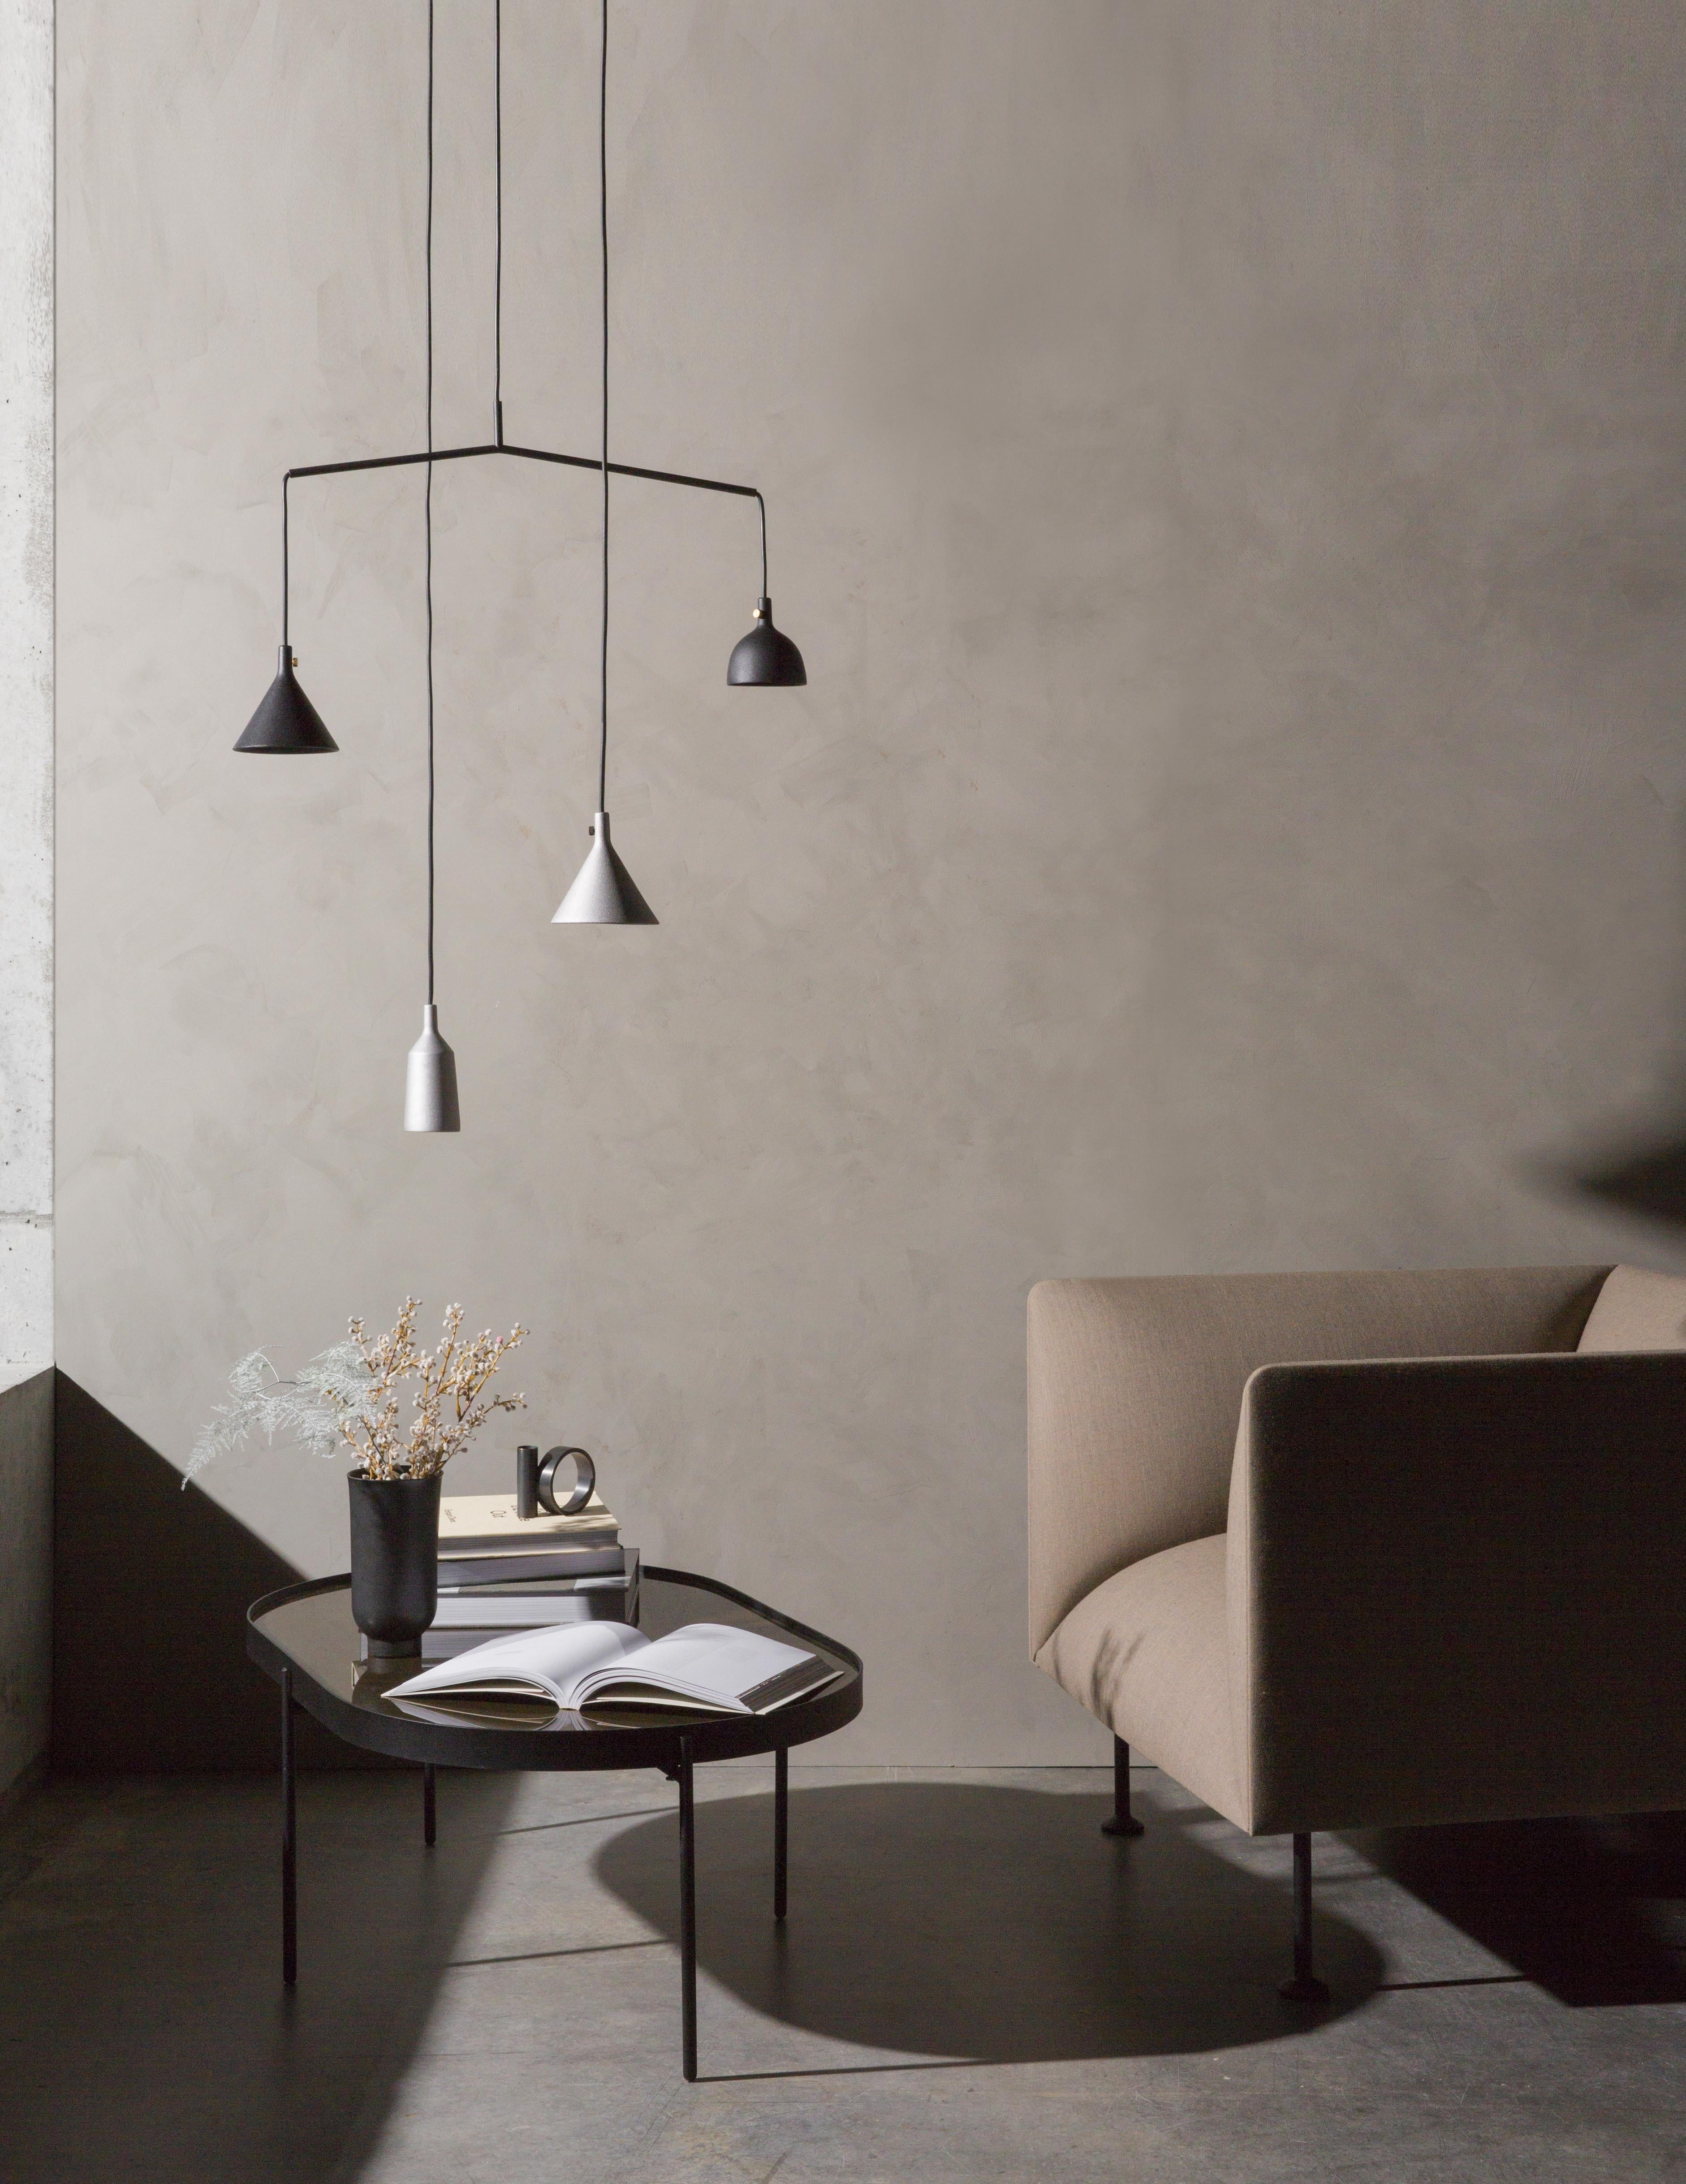 Cast pendant takes inspiration from the traditional plumb weight – a weight hanging from a line used by masons and carpenters since Ancient Egypt to establish a true vertical. An honest light, Cast pendant embodies our philosophy of soft minimalism.